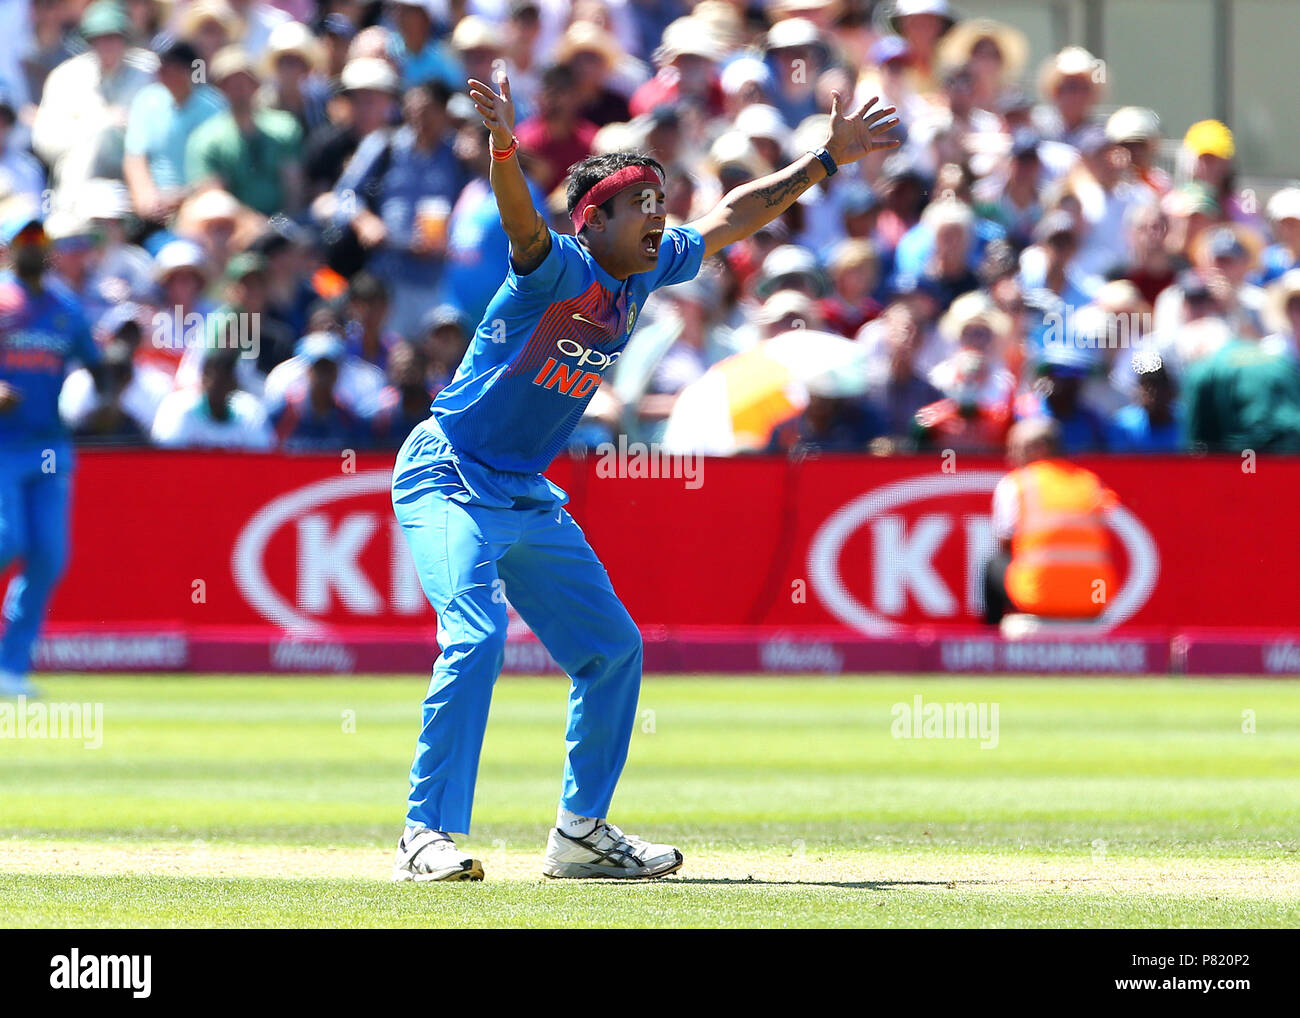 India's Siddarth Kaul appeals during the Second Vitality IT20 Series Match  at the Brightside Ground, Bristol Stock Photo - Alamy